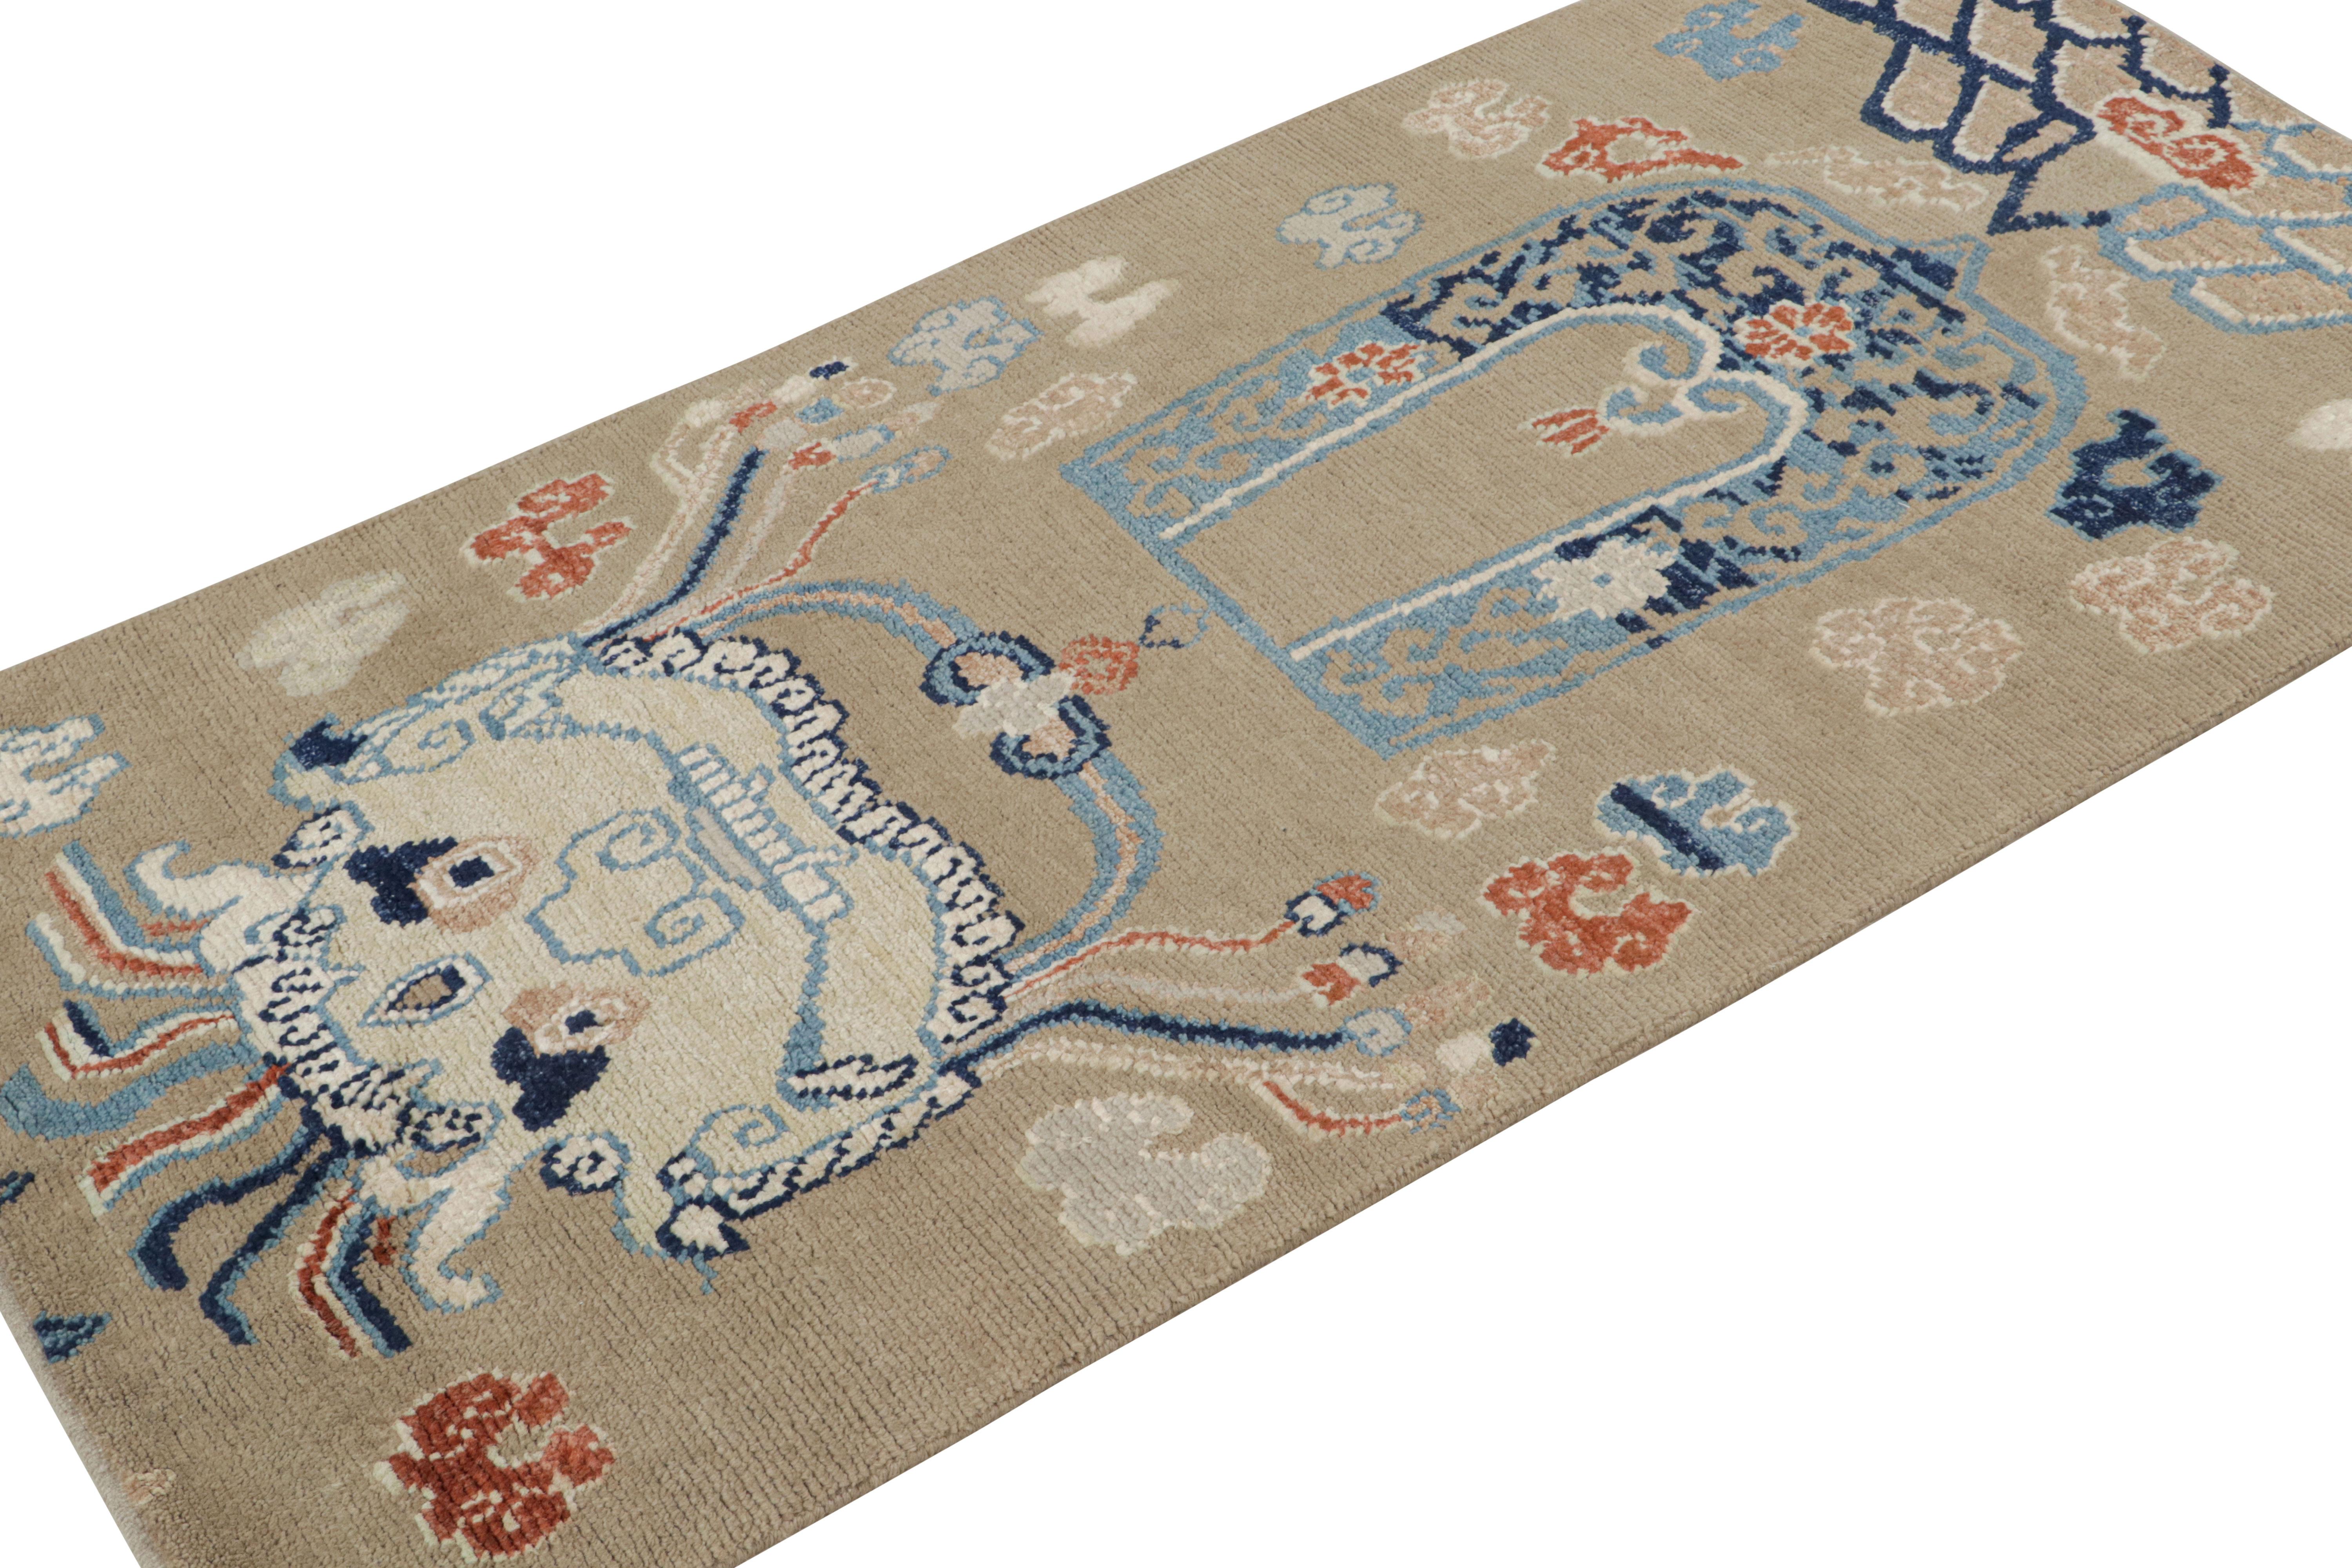 Hand-knotted in wool, this 3x6 classic dragon pictorial runner rug features a vibrant colorway of orange, beige and blue tones. 

On the Design: 

The design recaptures Oriental pictorial representations of dragons in a bold play of fiery tones.